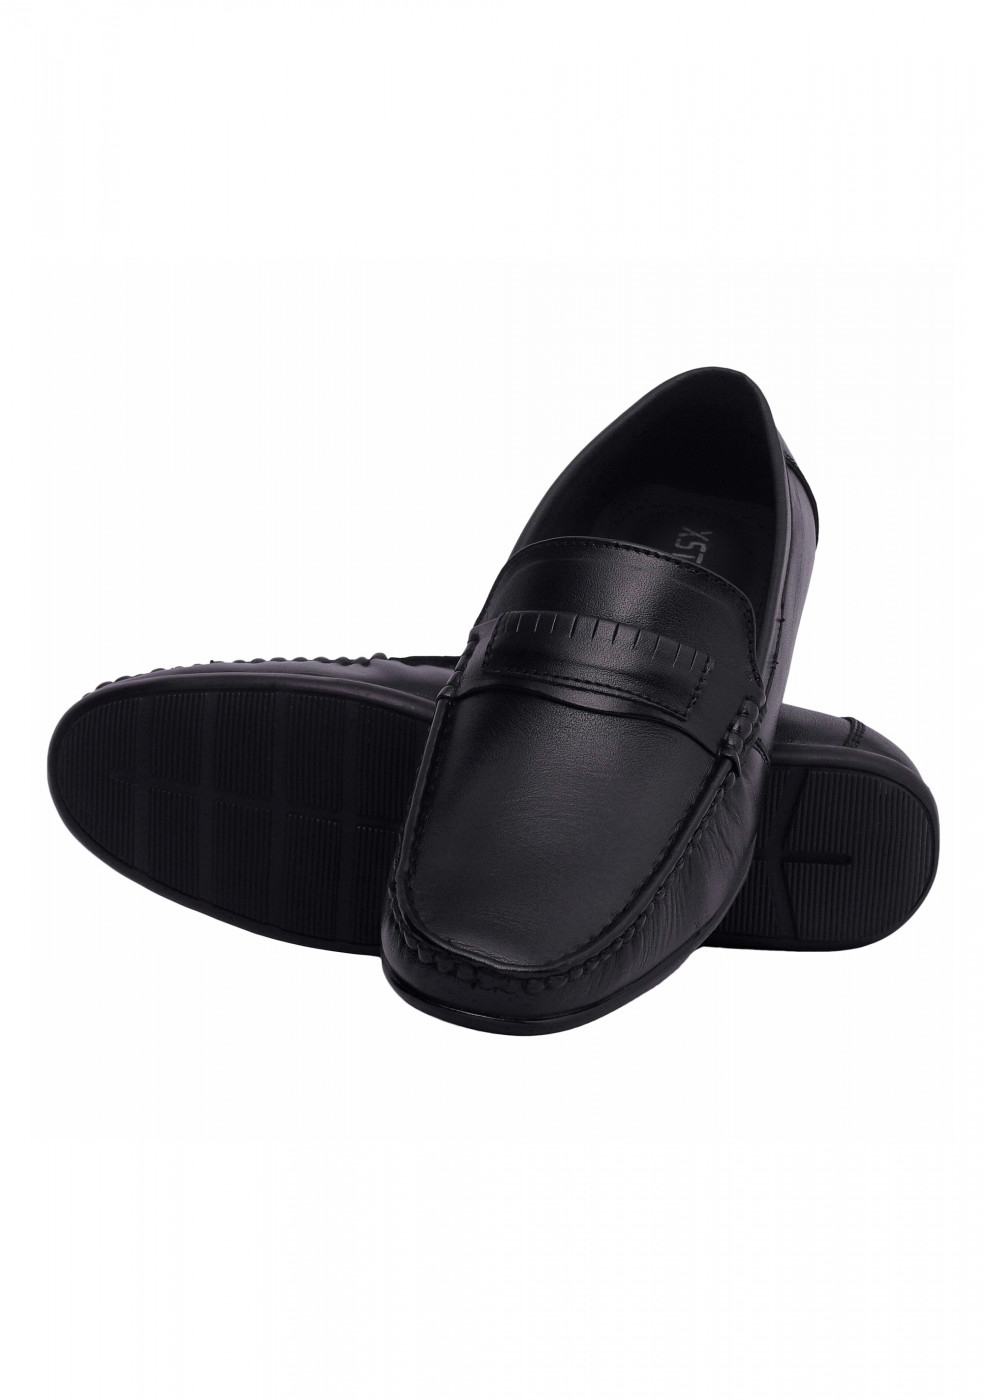 XSTOM Black Lather Casual Loafers For Men